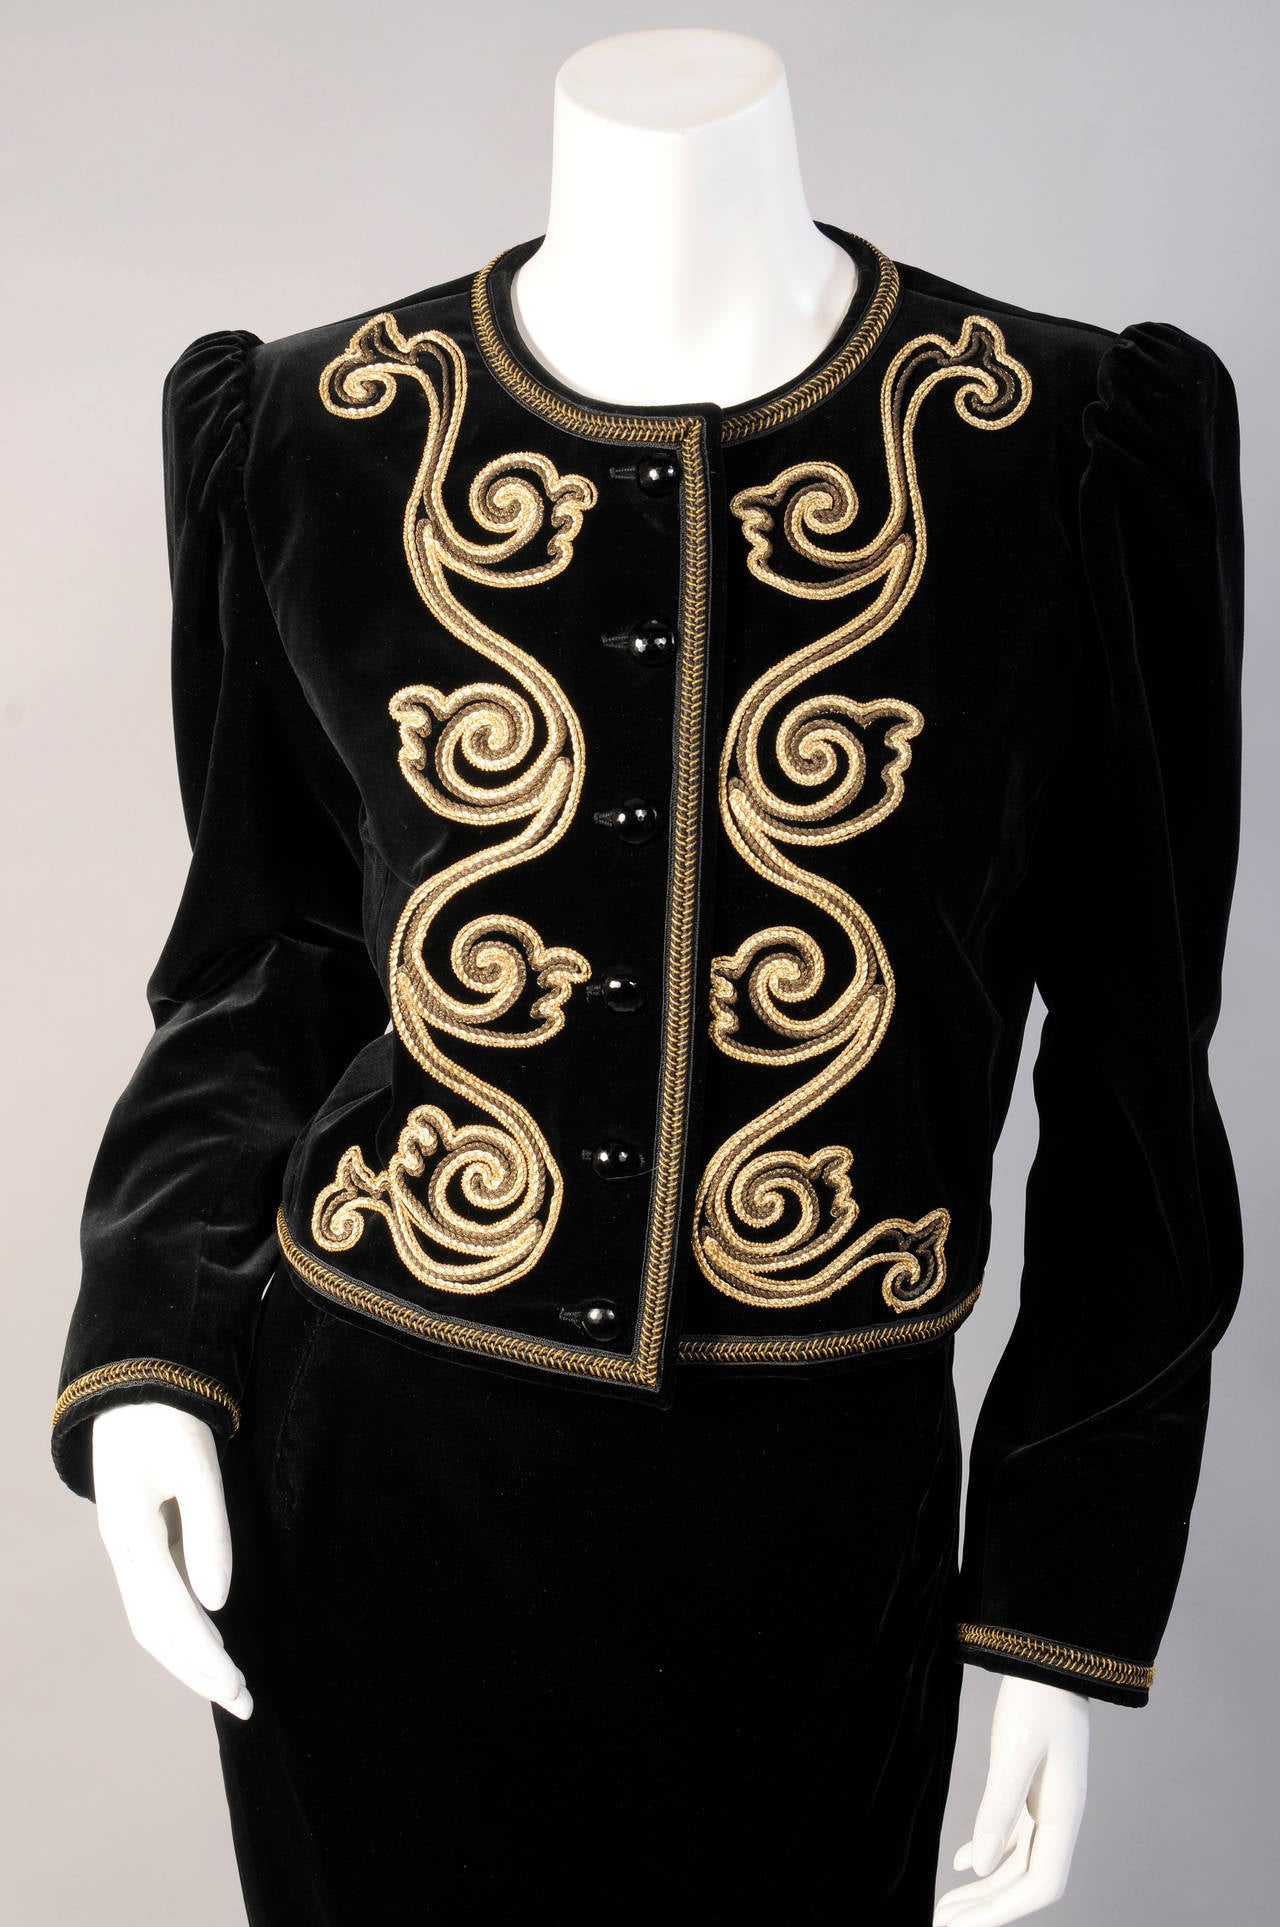 Rich gold soutache braid creates an elegant design on the front of this classic black velvet jacket. There is a second gold braid used to edge the jacket and cuffs, and it  closes with black jet buttons. The long lean matching skirt has a high slit